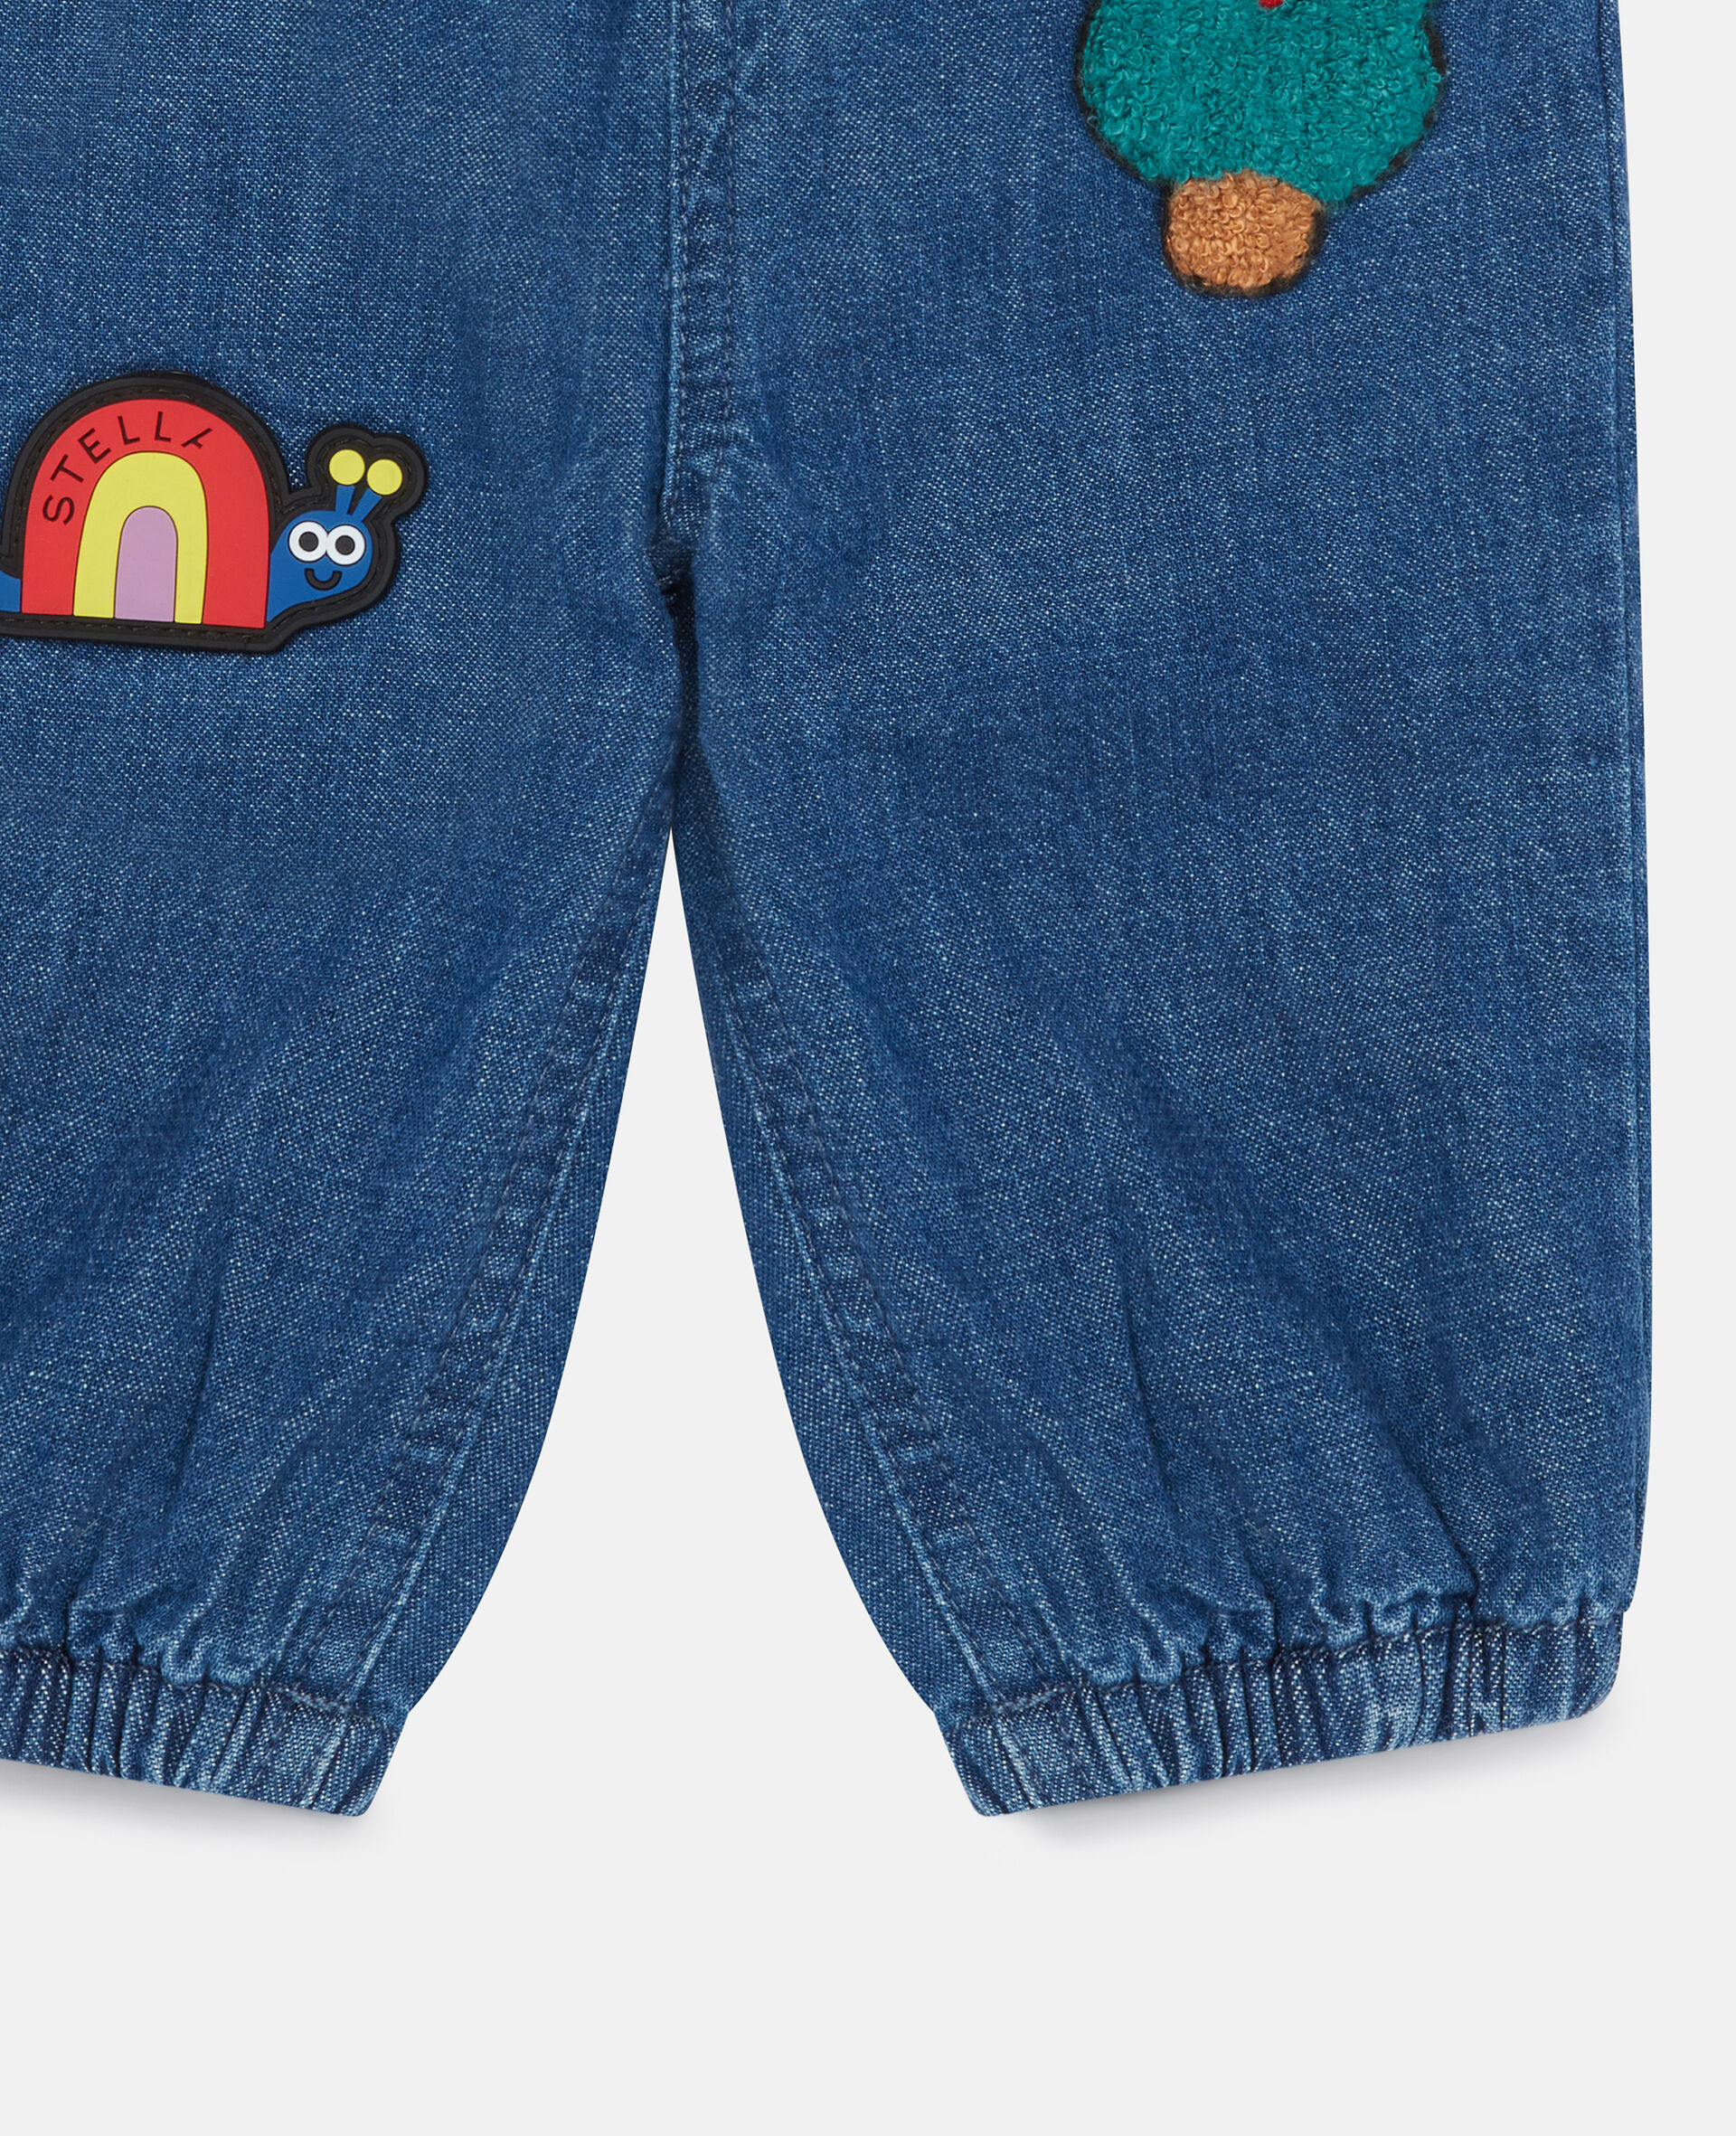 Relaxed Denim Trousers with Patches-Blue-large image number 1